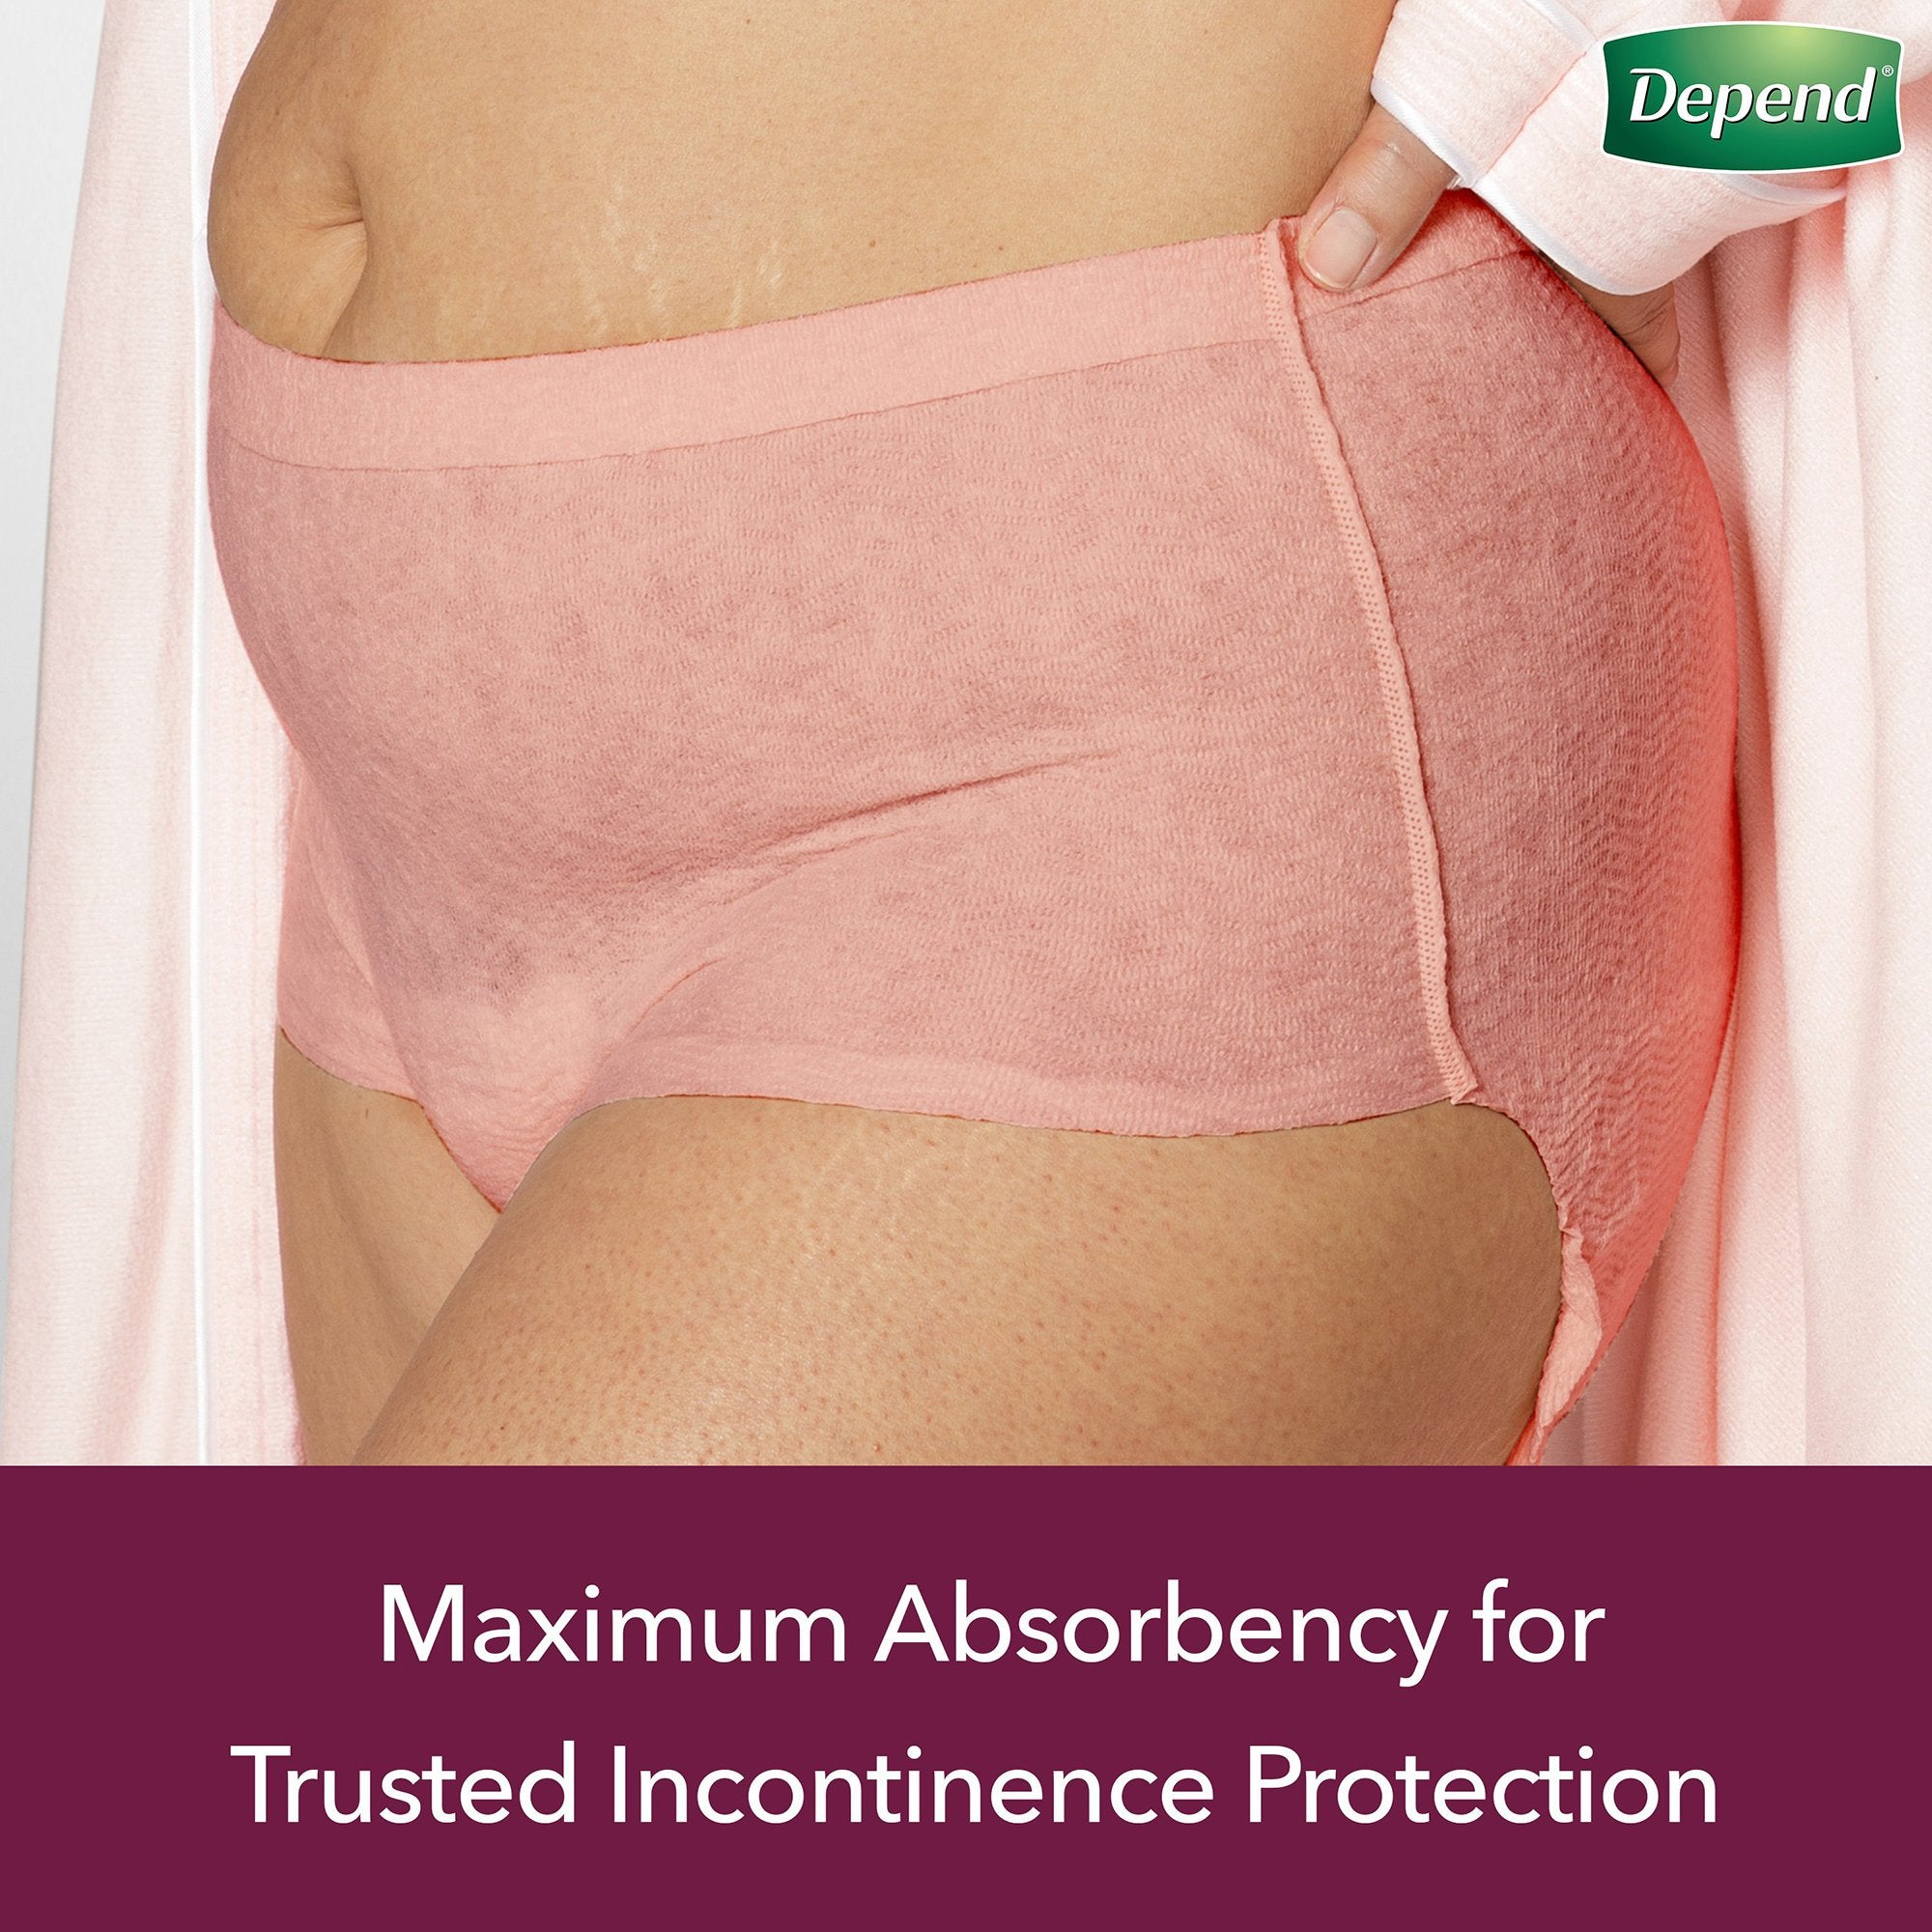 Female Adult Absorbent Underwear Depend Silhouette Pull On with Tear A –  FamilyOTC